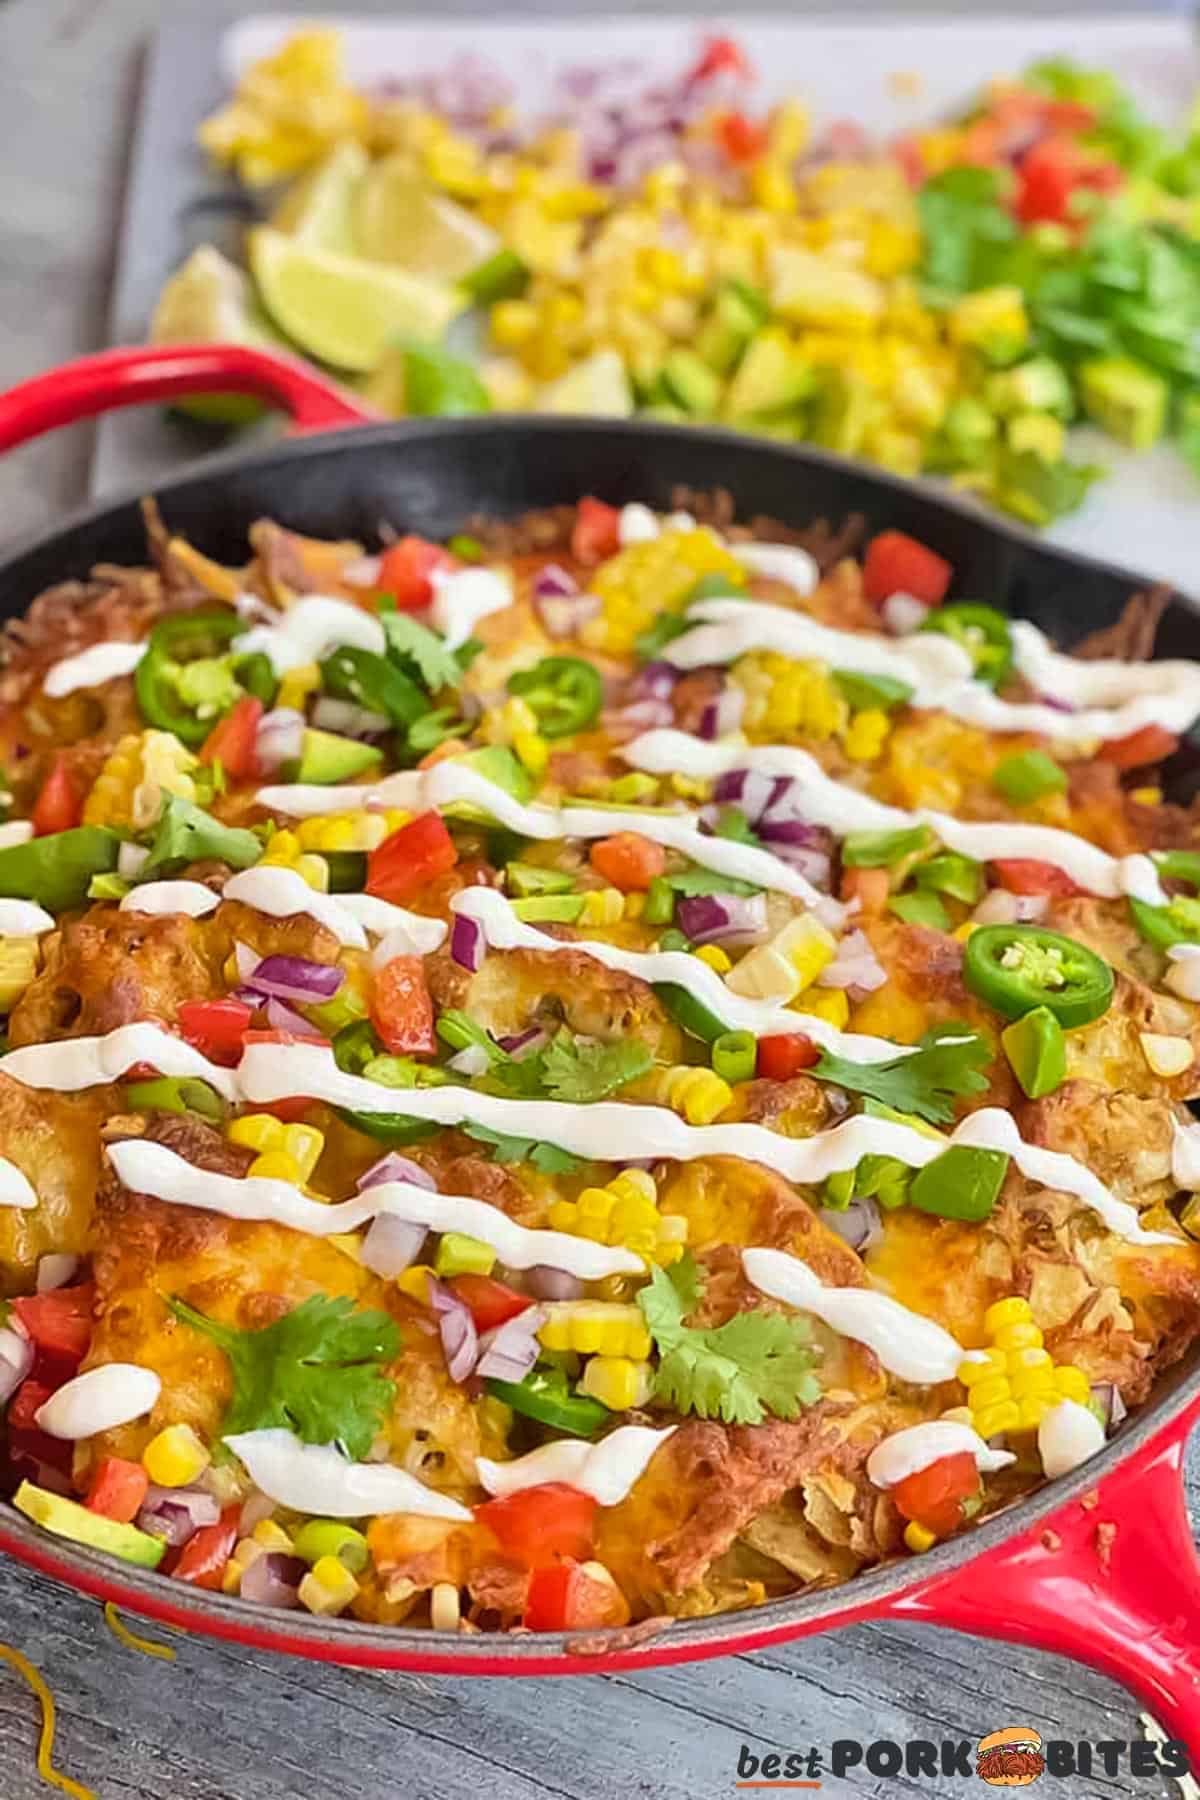 a red skillet with completed nachos in front of a cutting board filled with nacho toppings